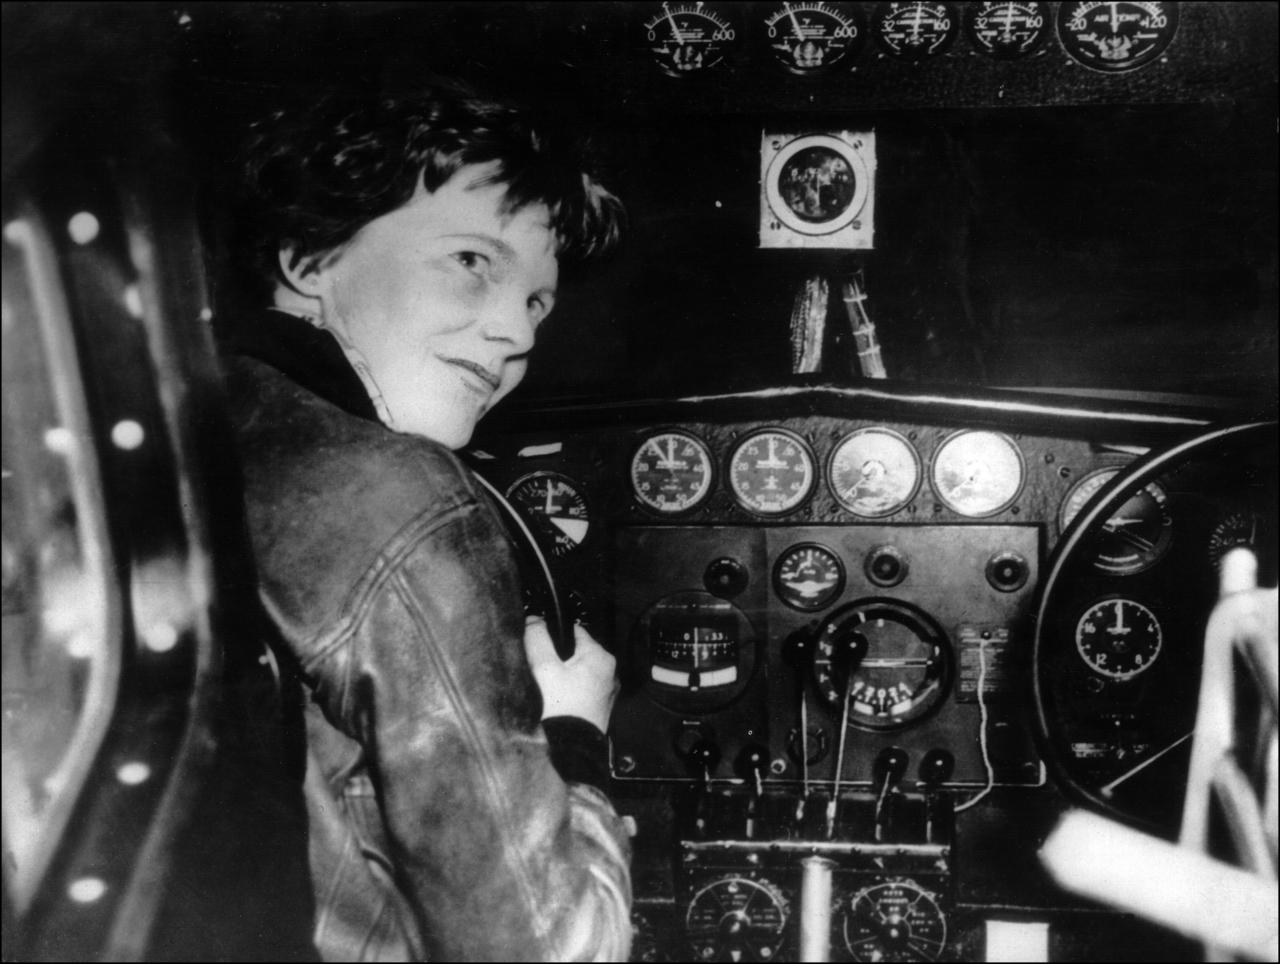 Amelia Earhart in the cocpit of her Lockheed Electra 10E, NR16020.